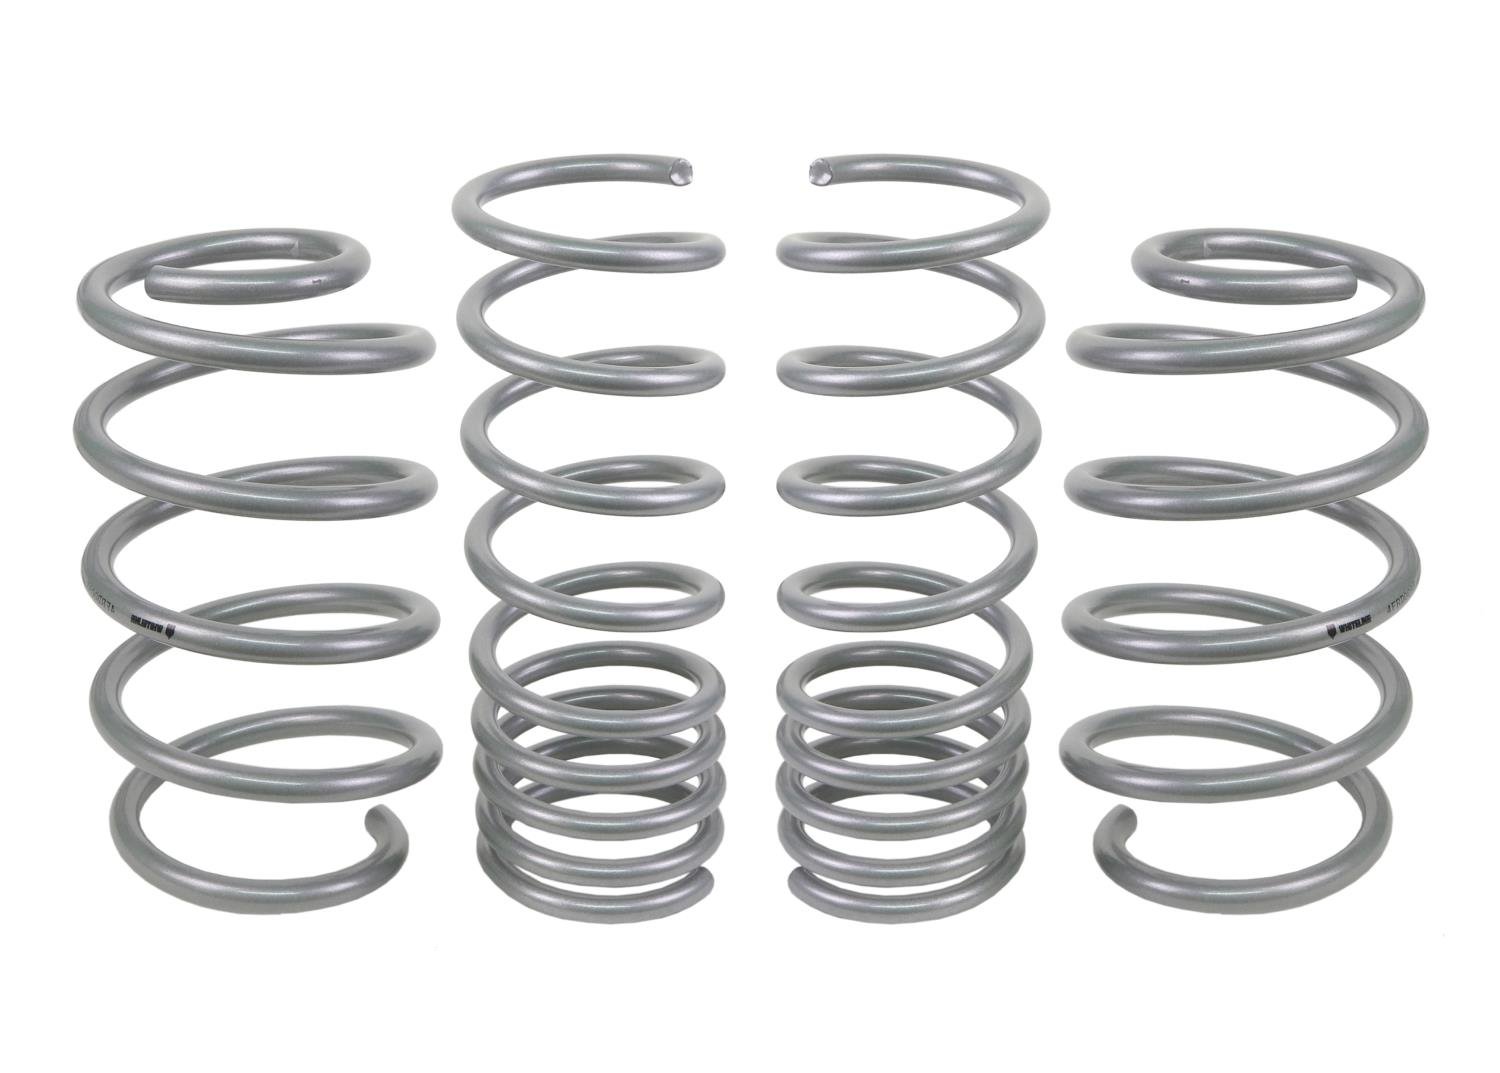 WSK-FRD009 Performance Lowering Springs for 2012-2018 Ford Focus ST